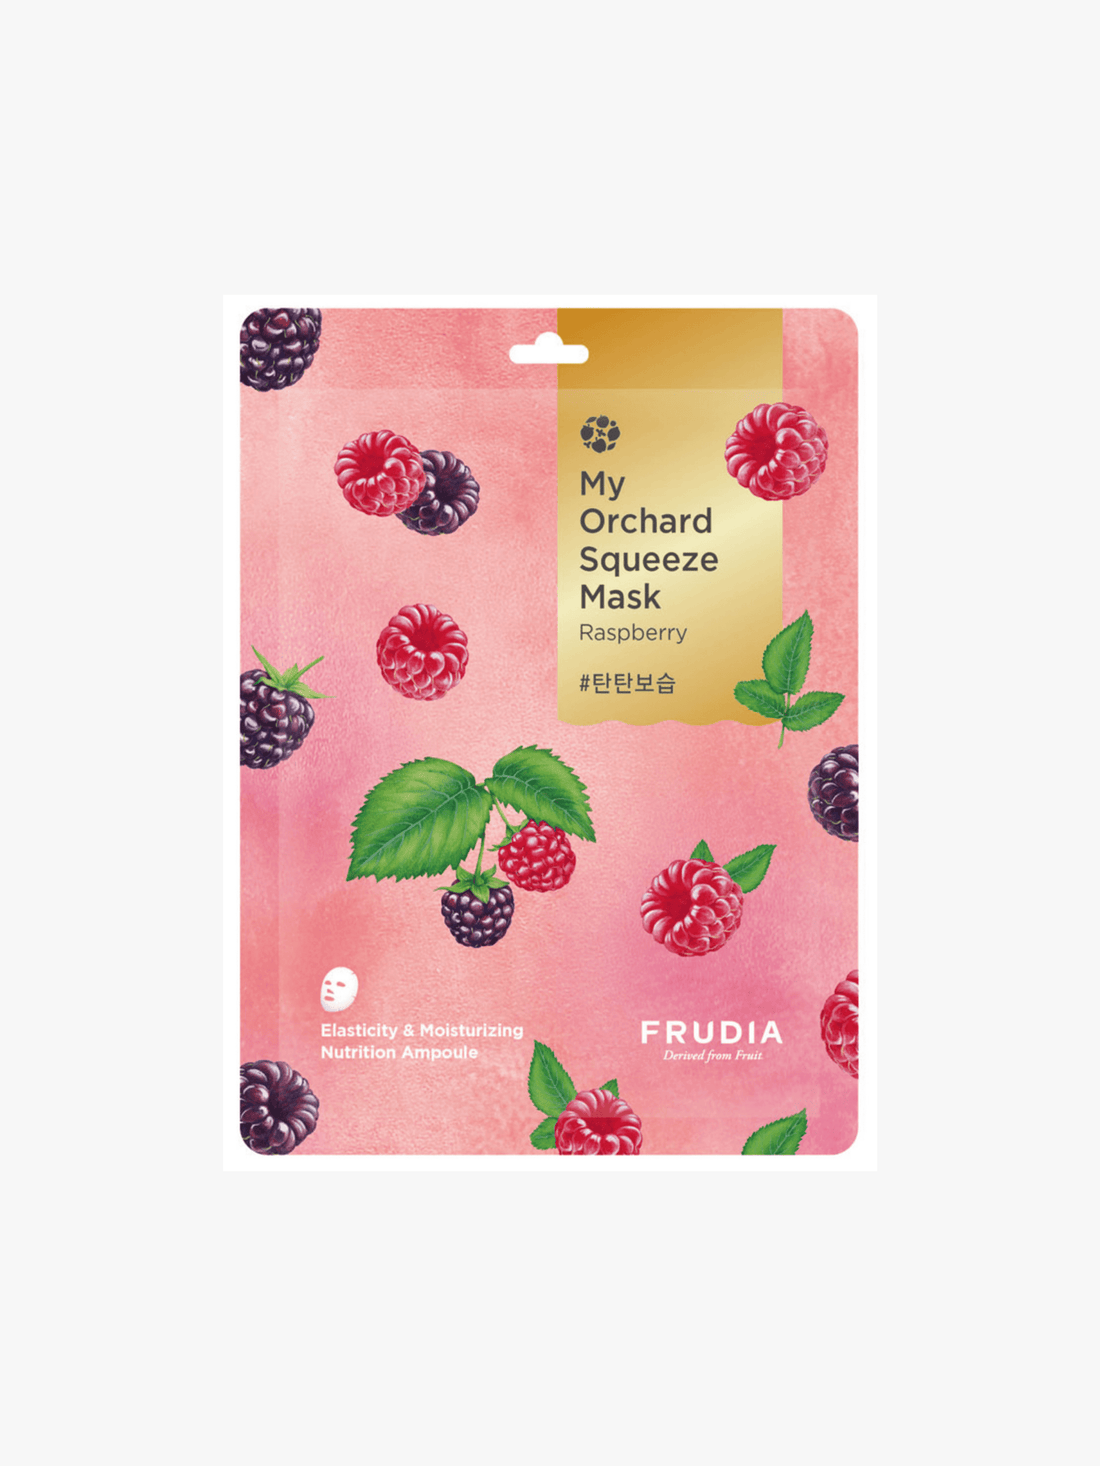 FRUDIA - Mask - My Orchard Squeeze Mask Raspberry